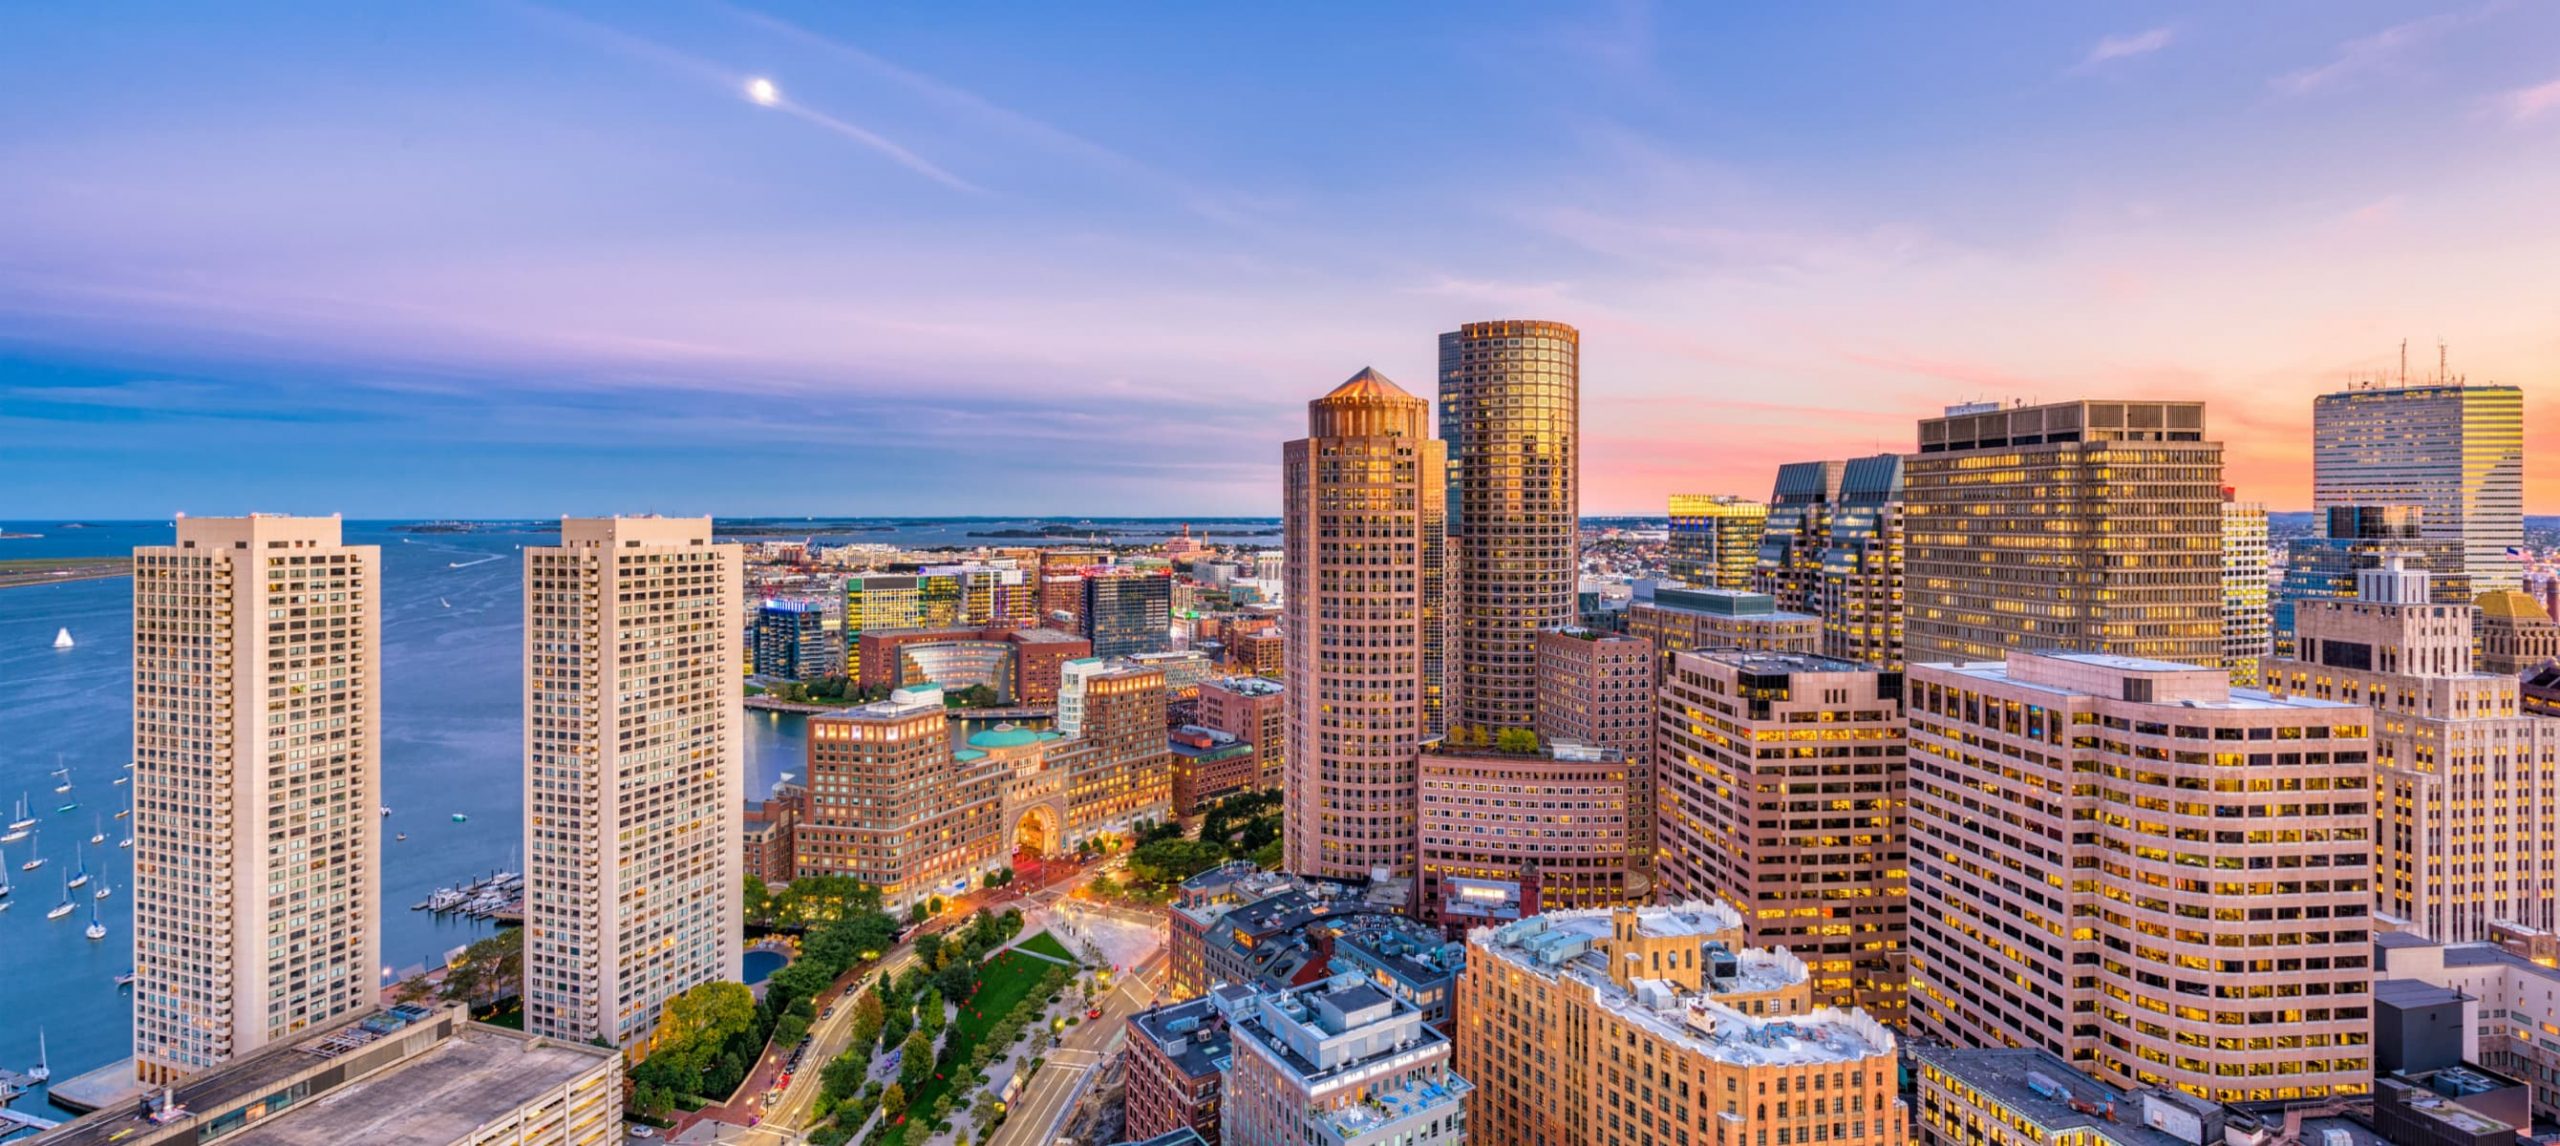 The Best Hotels In Downtown Boston Area